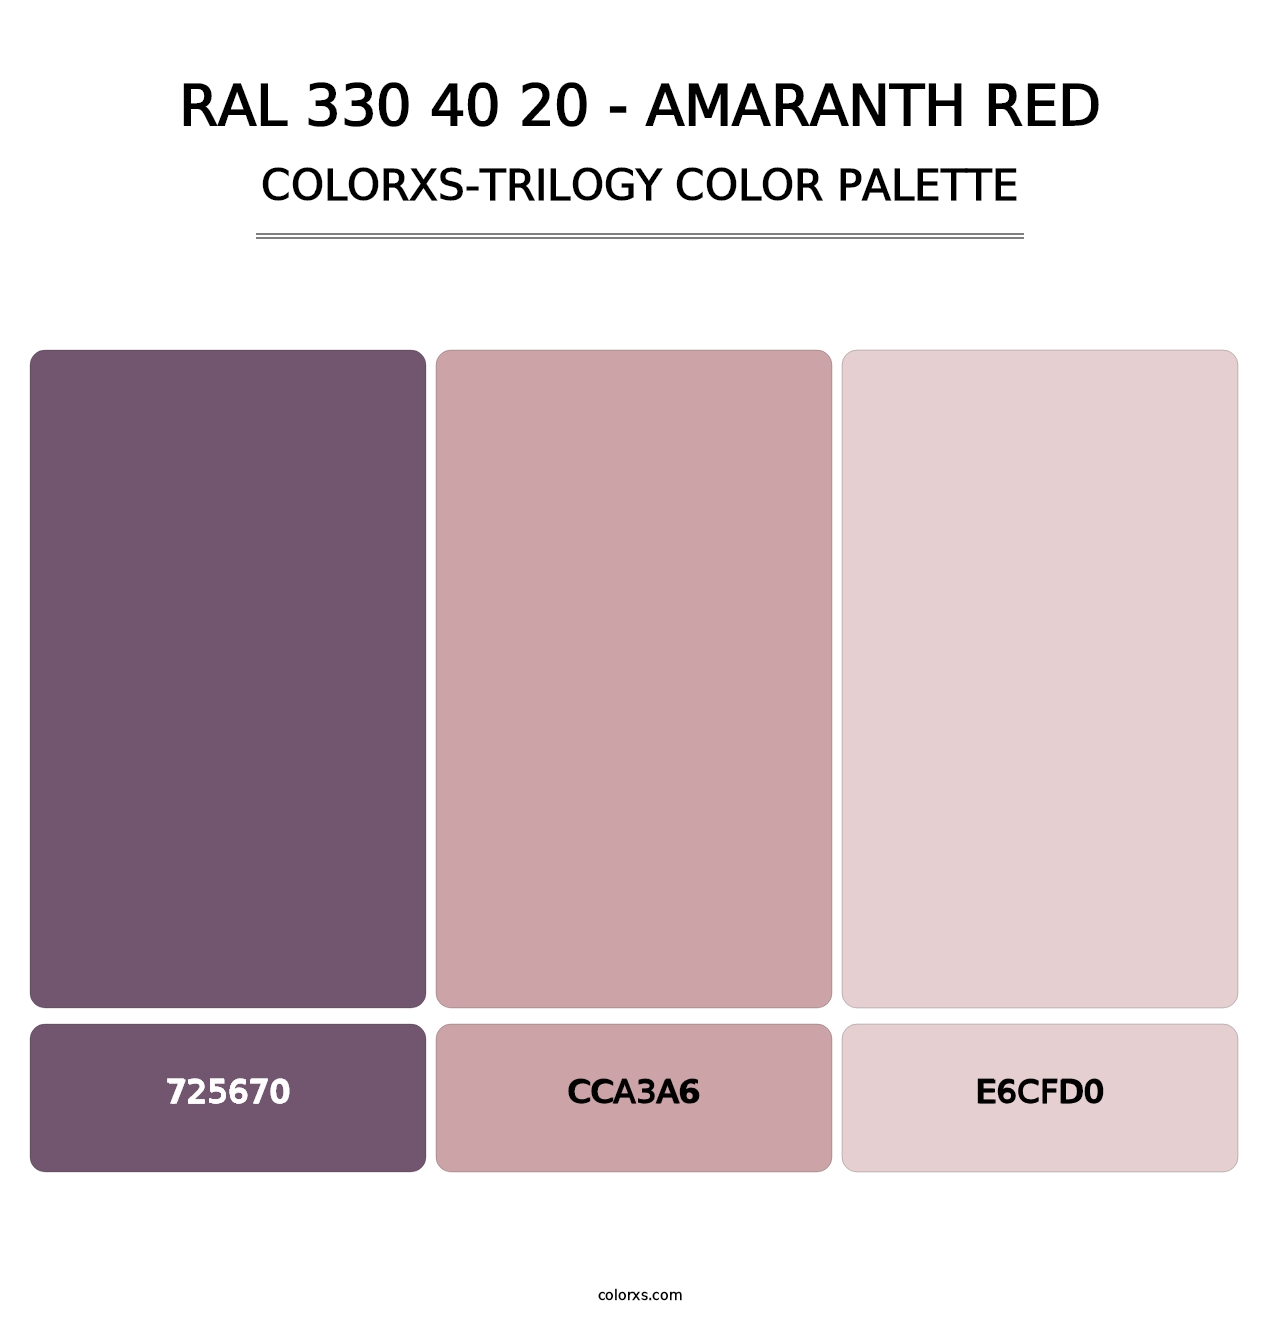 RAL 330 40 20 - Amaranth Red - Colorxs Trilogy Palette